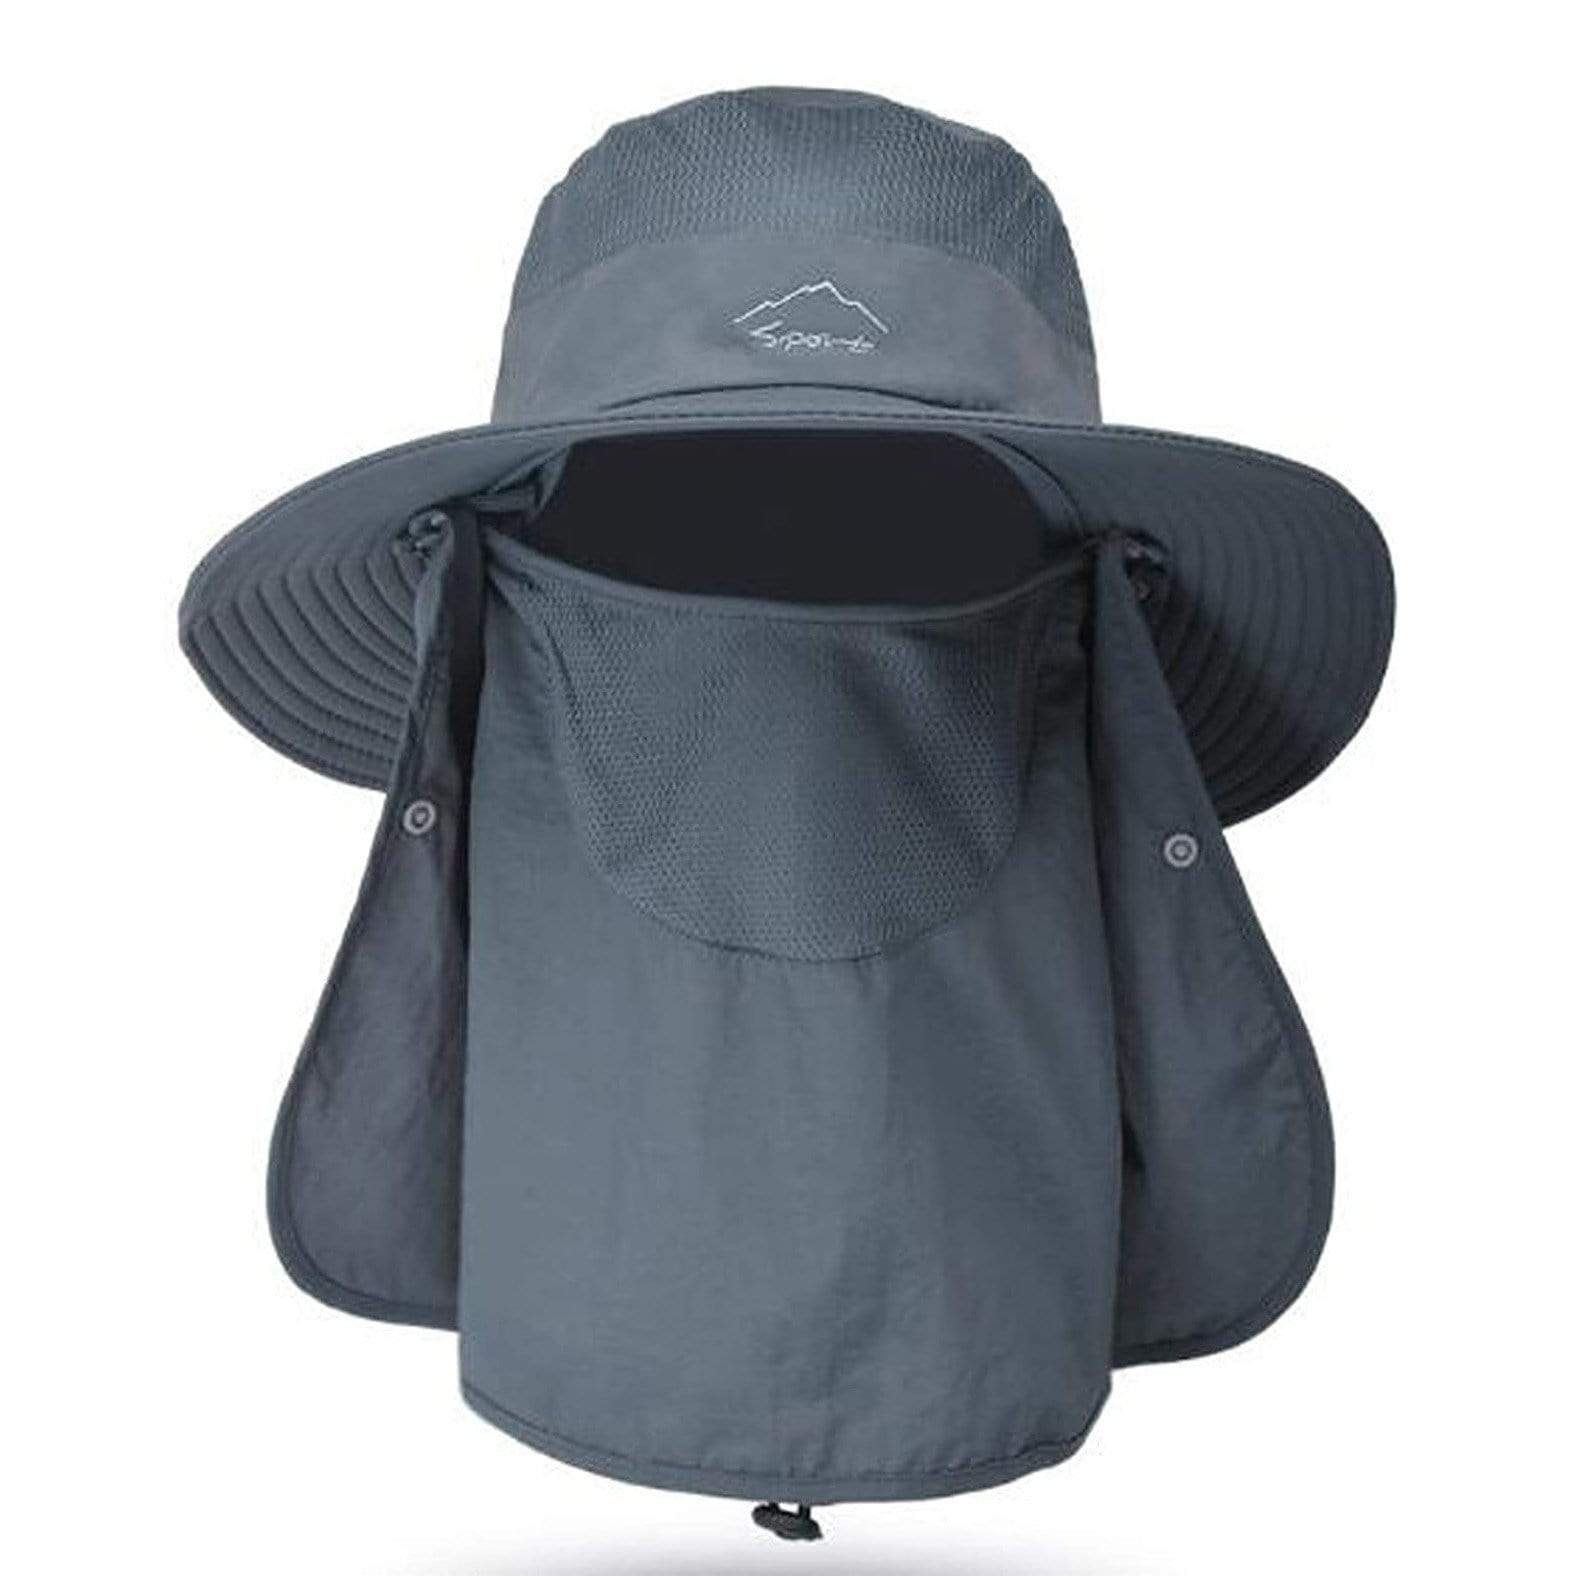 MIERSPORT Fishing Hat Sun Cap with Removable Face Neck Cover - Dark Grey